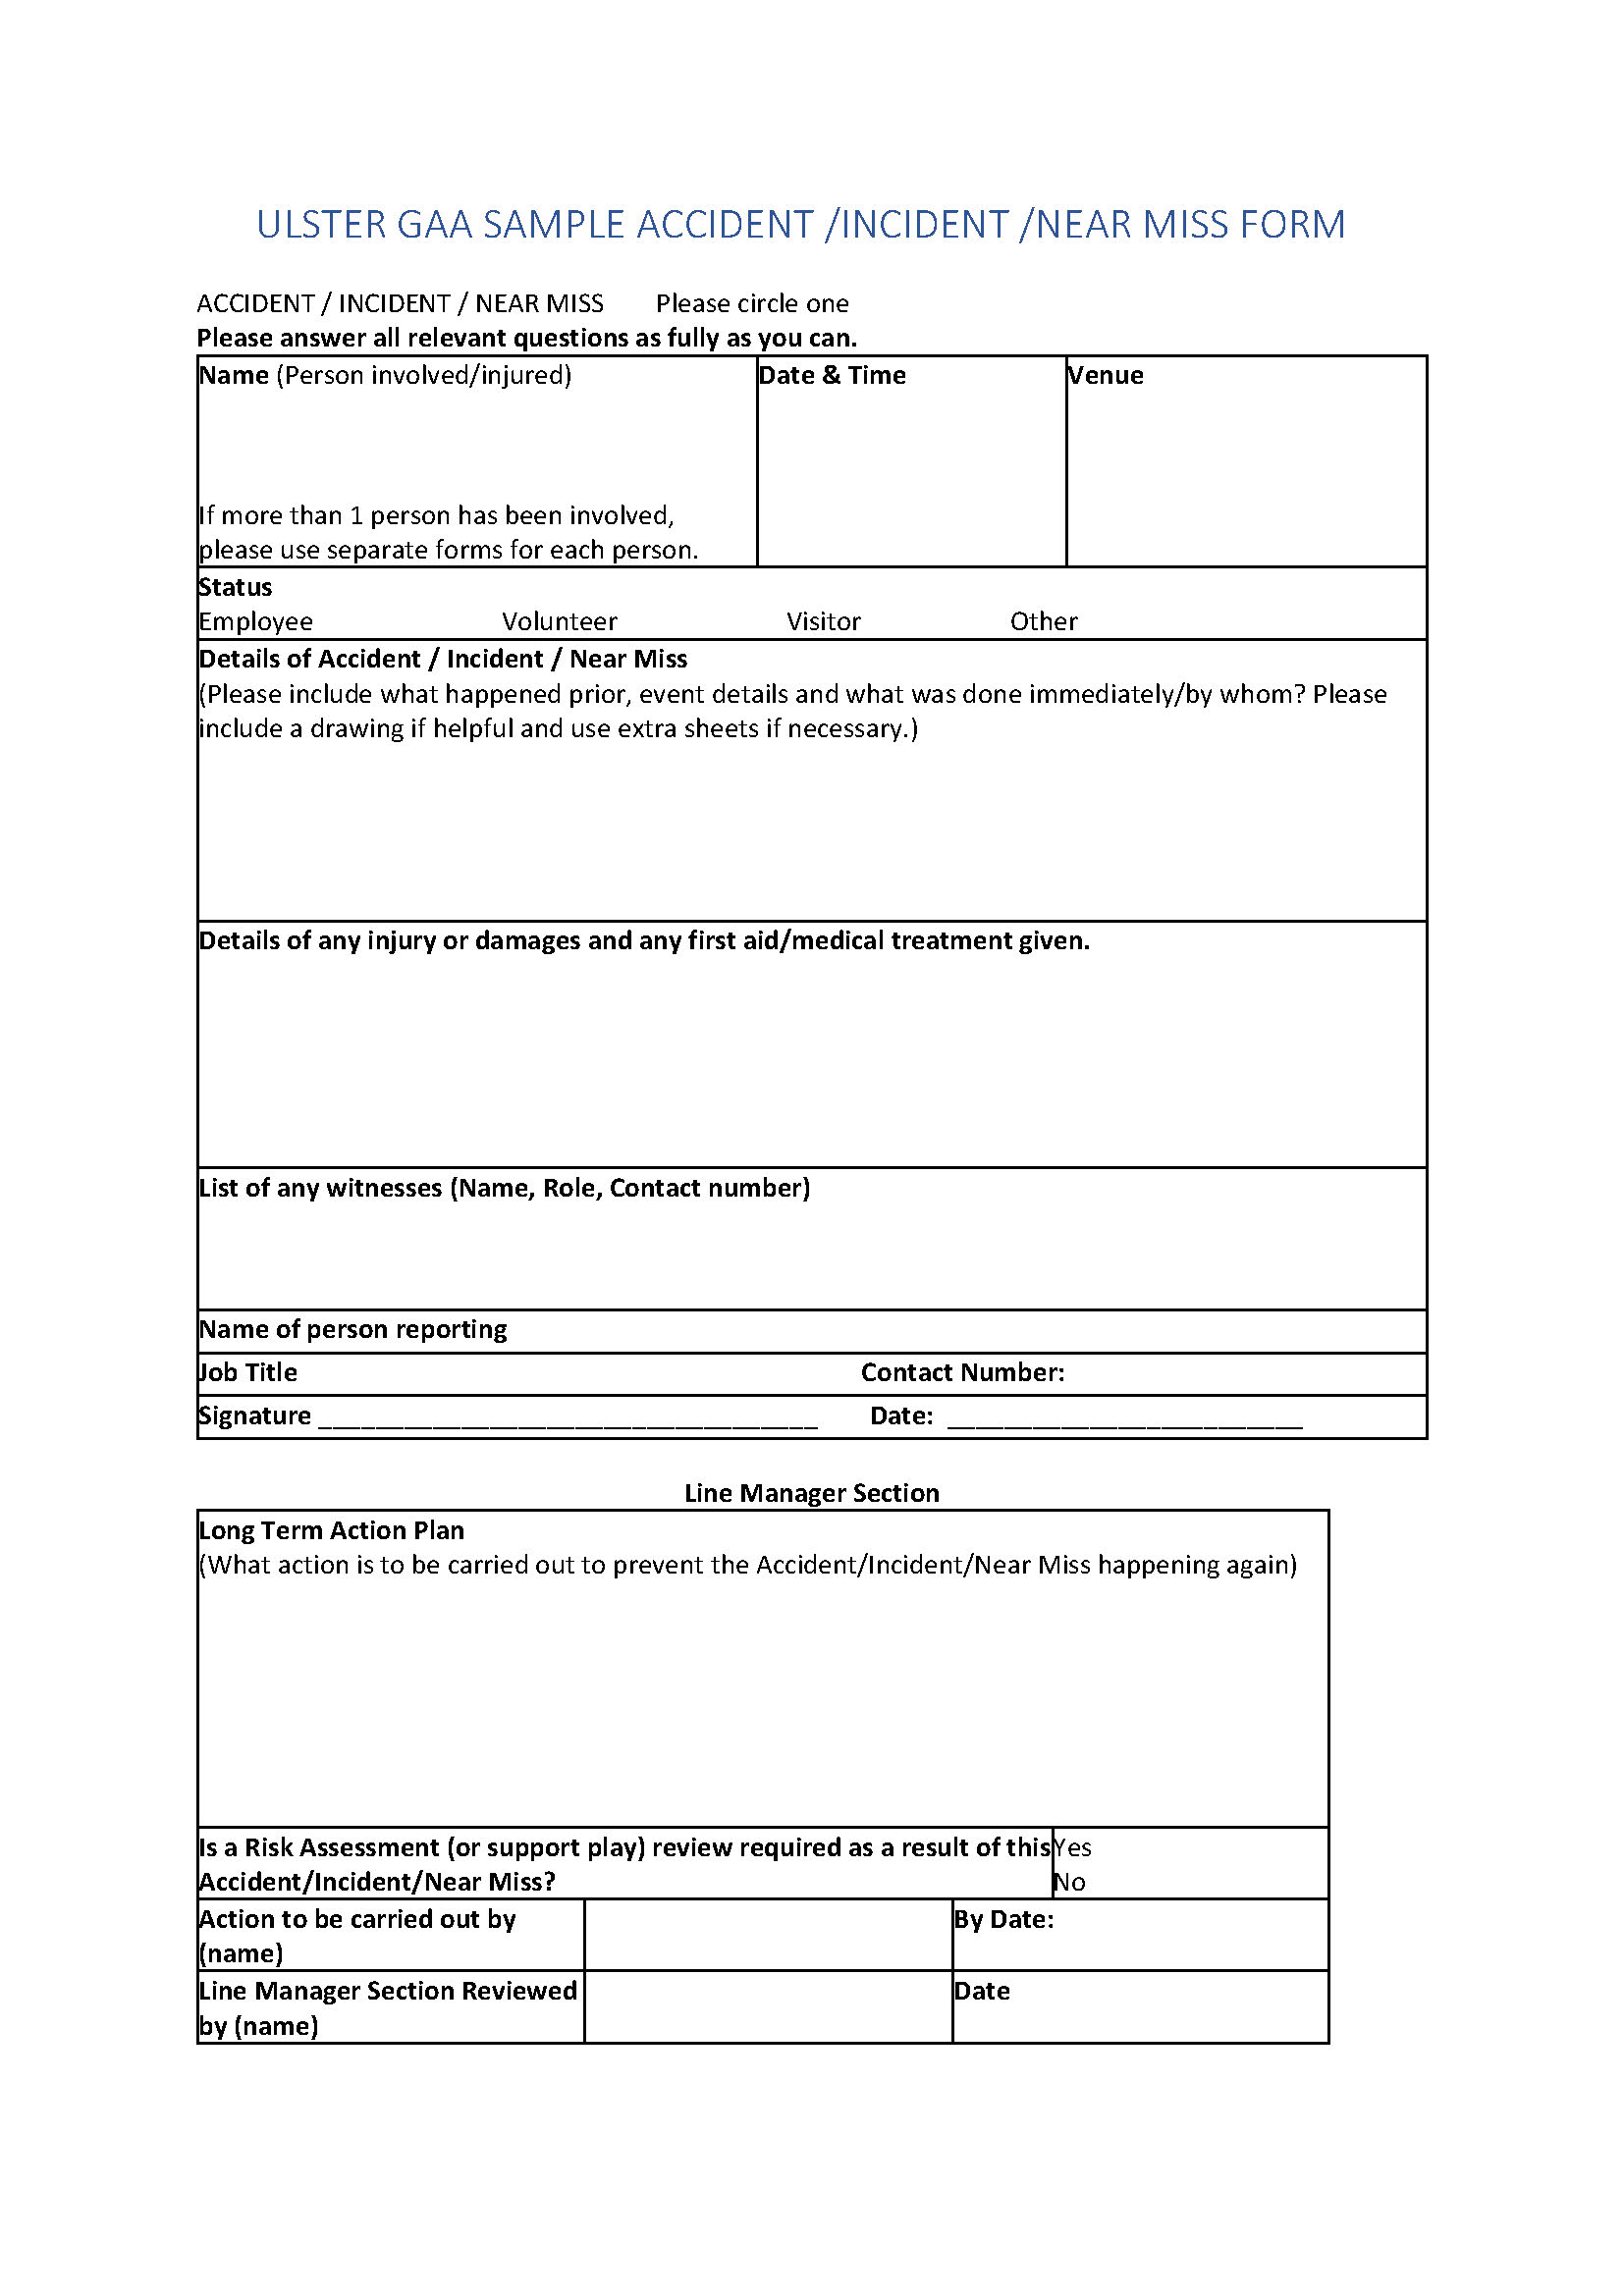 Ulster GAA Sample Accident Form 2023